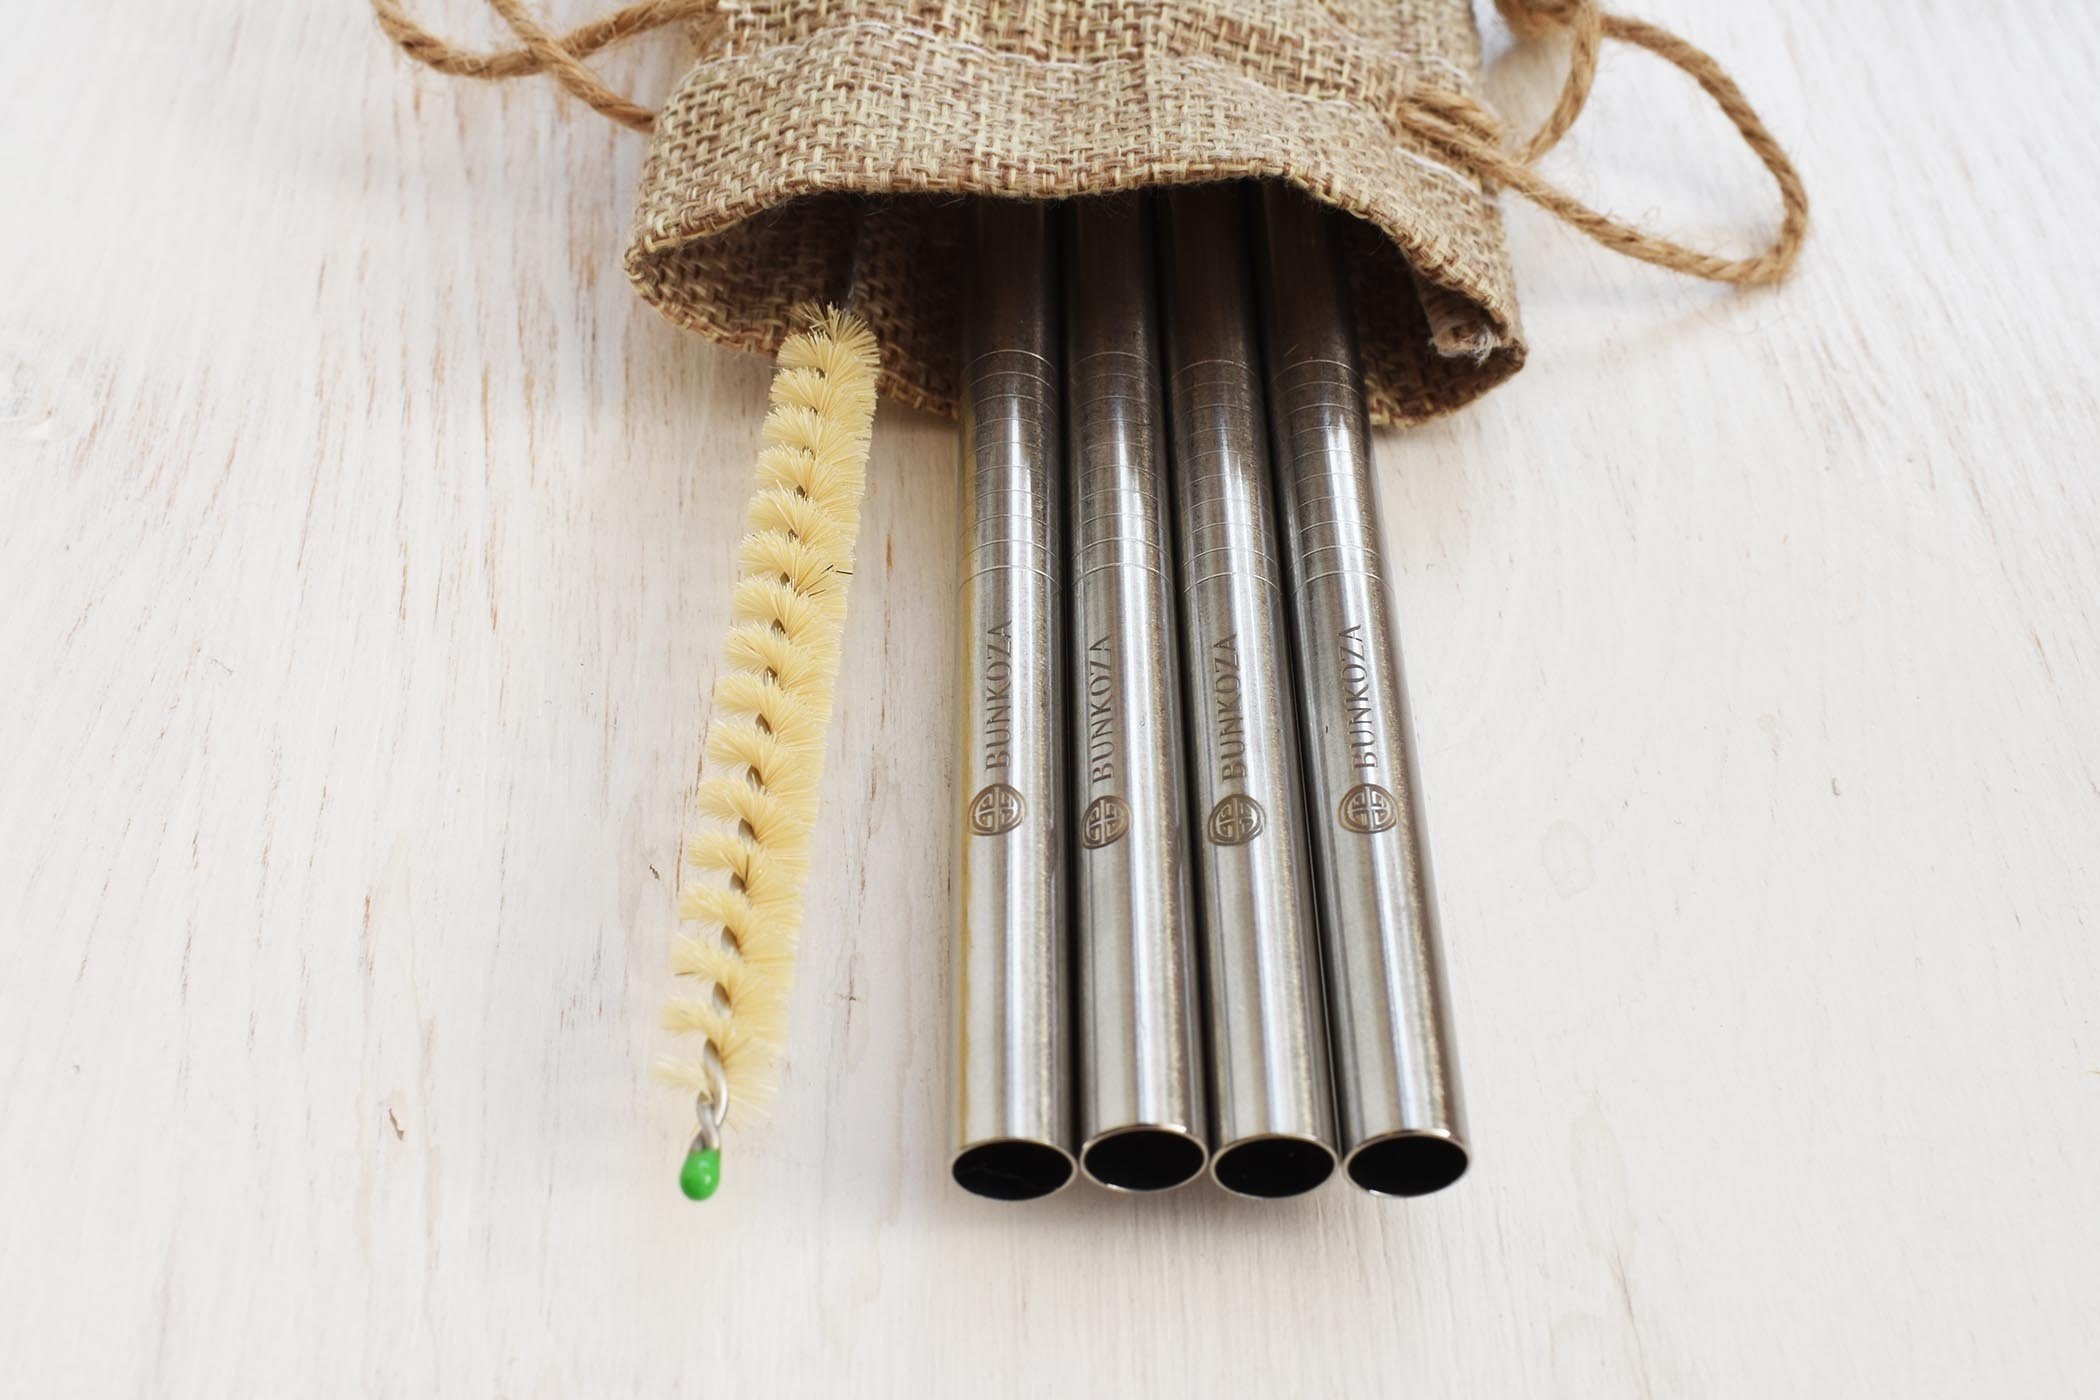 stainless steel straws with straw cleaner and travel bag